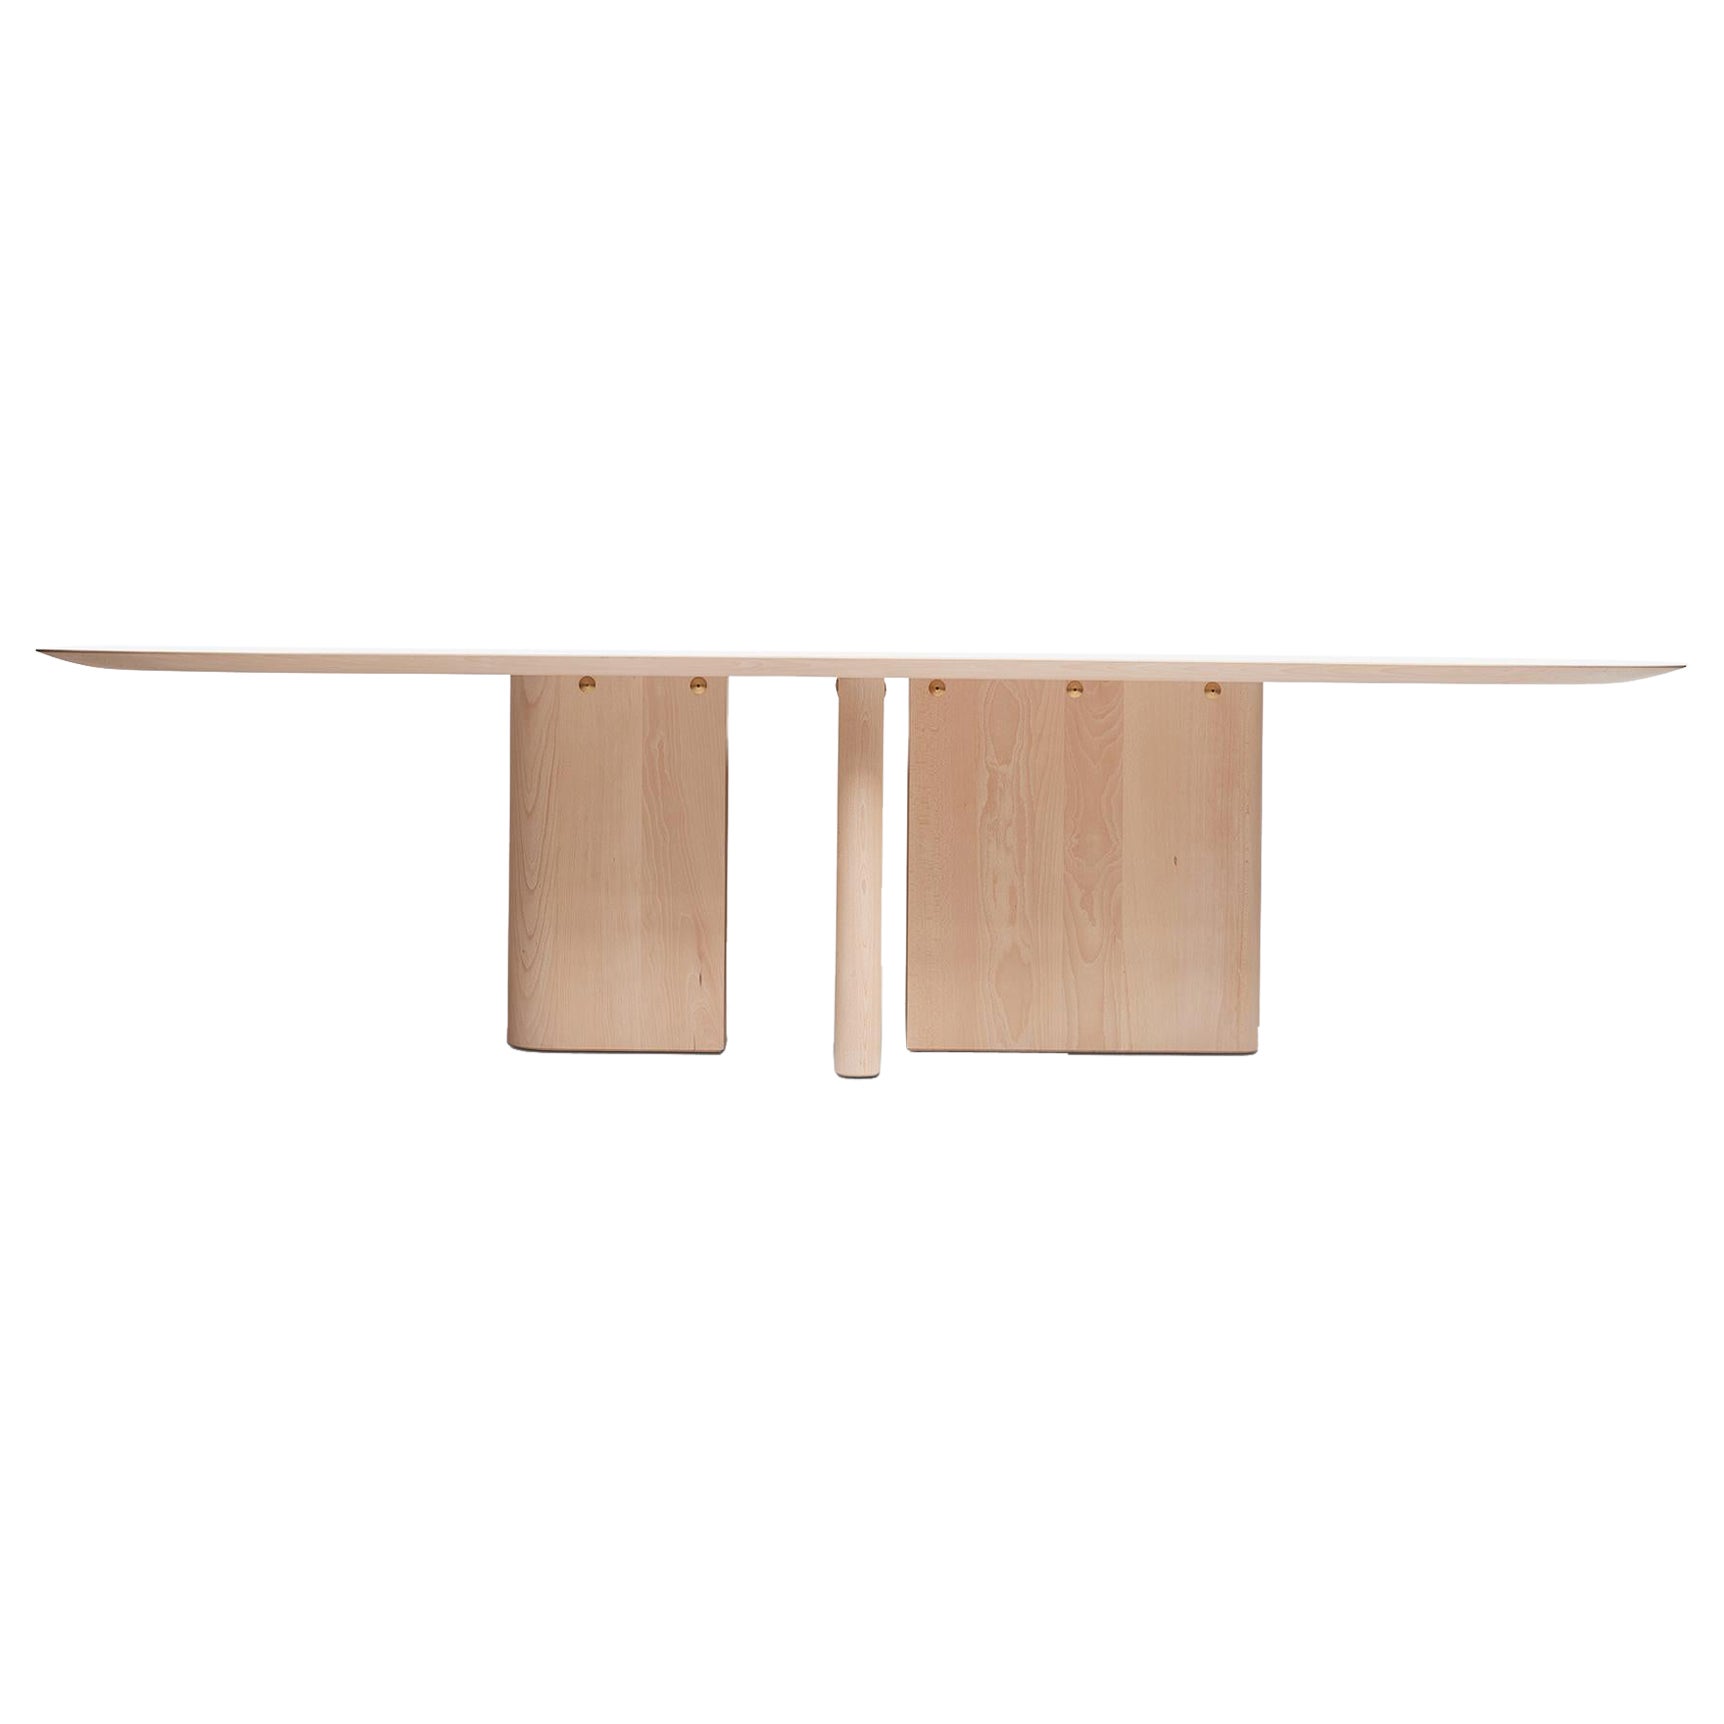 MG210 Dining Table in Danish beech by Malte Gormsen design by Norm Architects For Sale